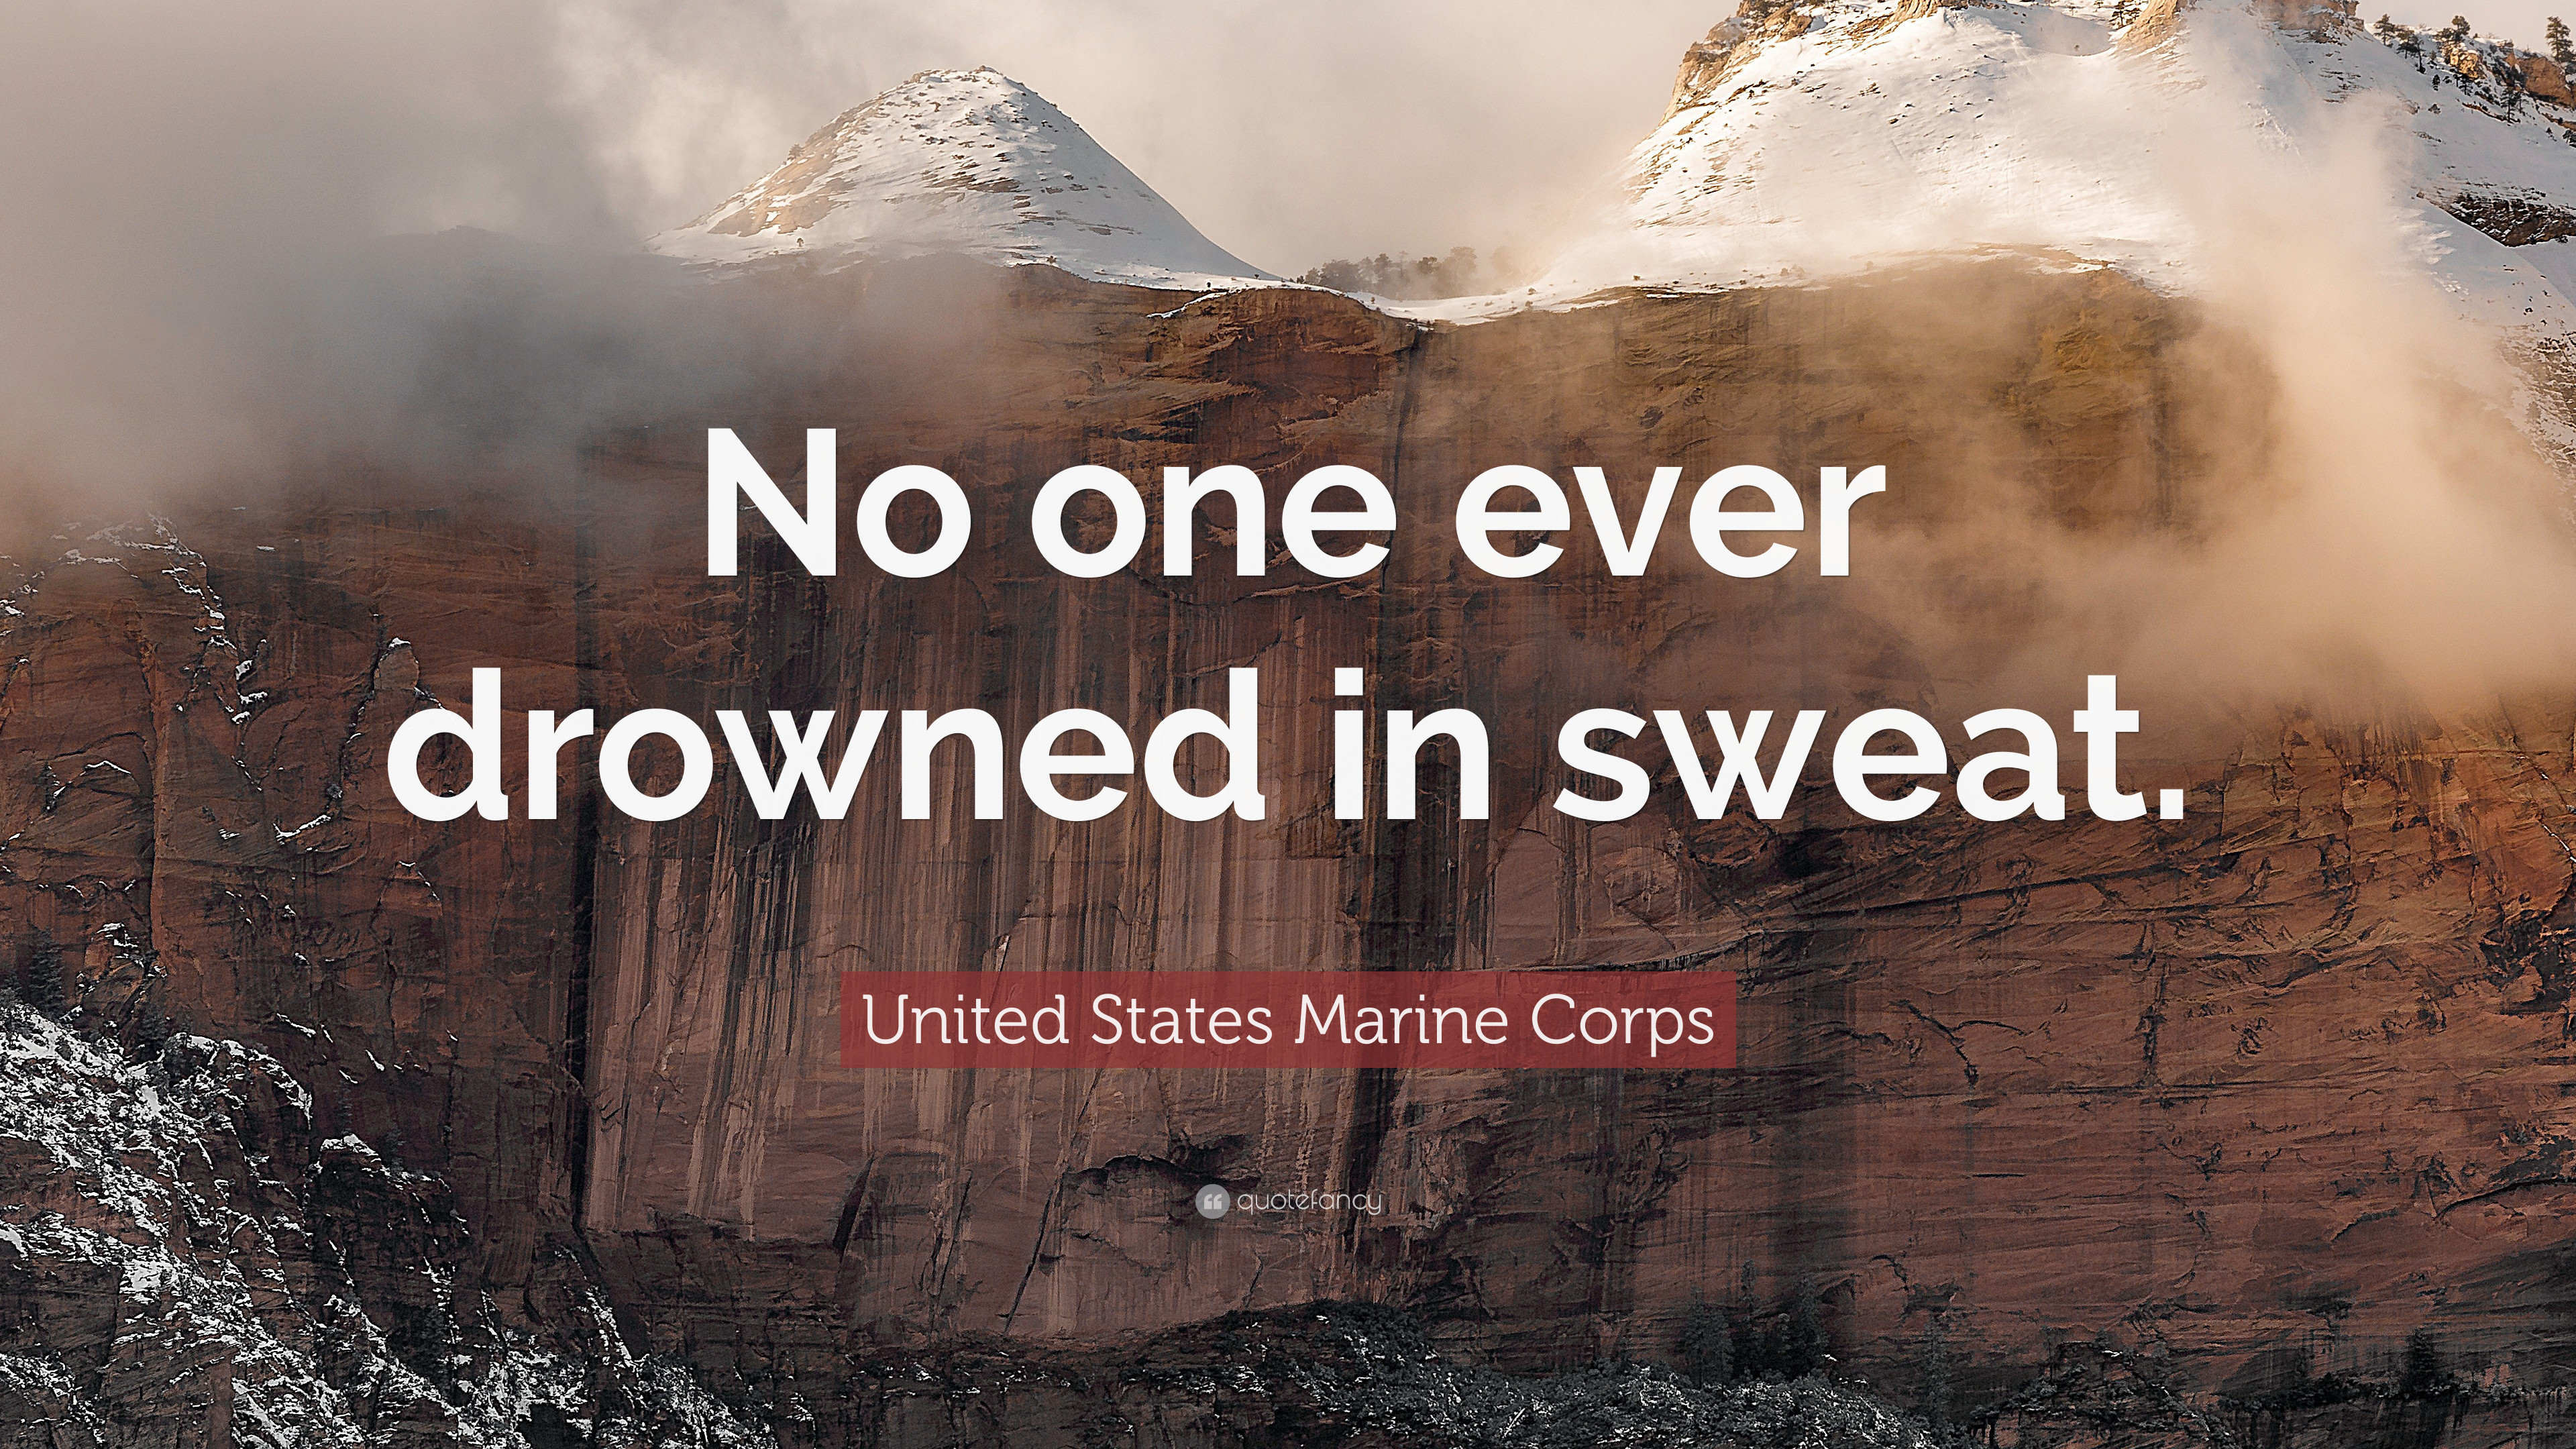 3840x2160 United States Marine Corps Quote: “No one ever drowned in sweat.”